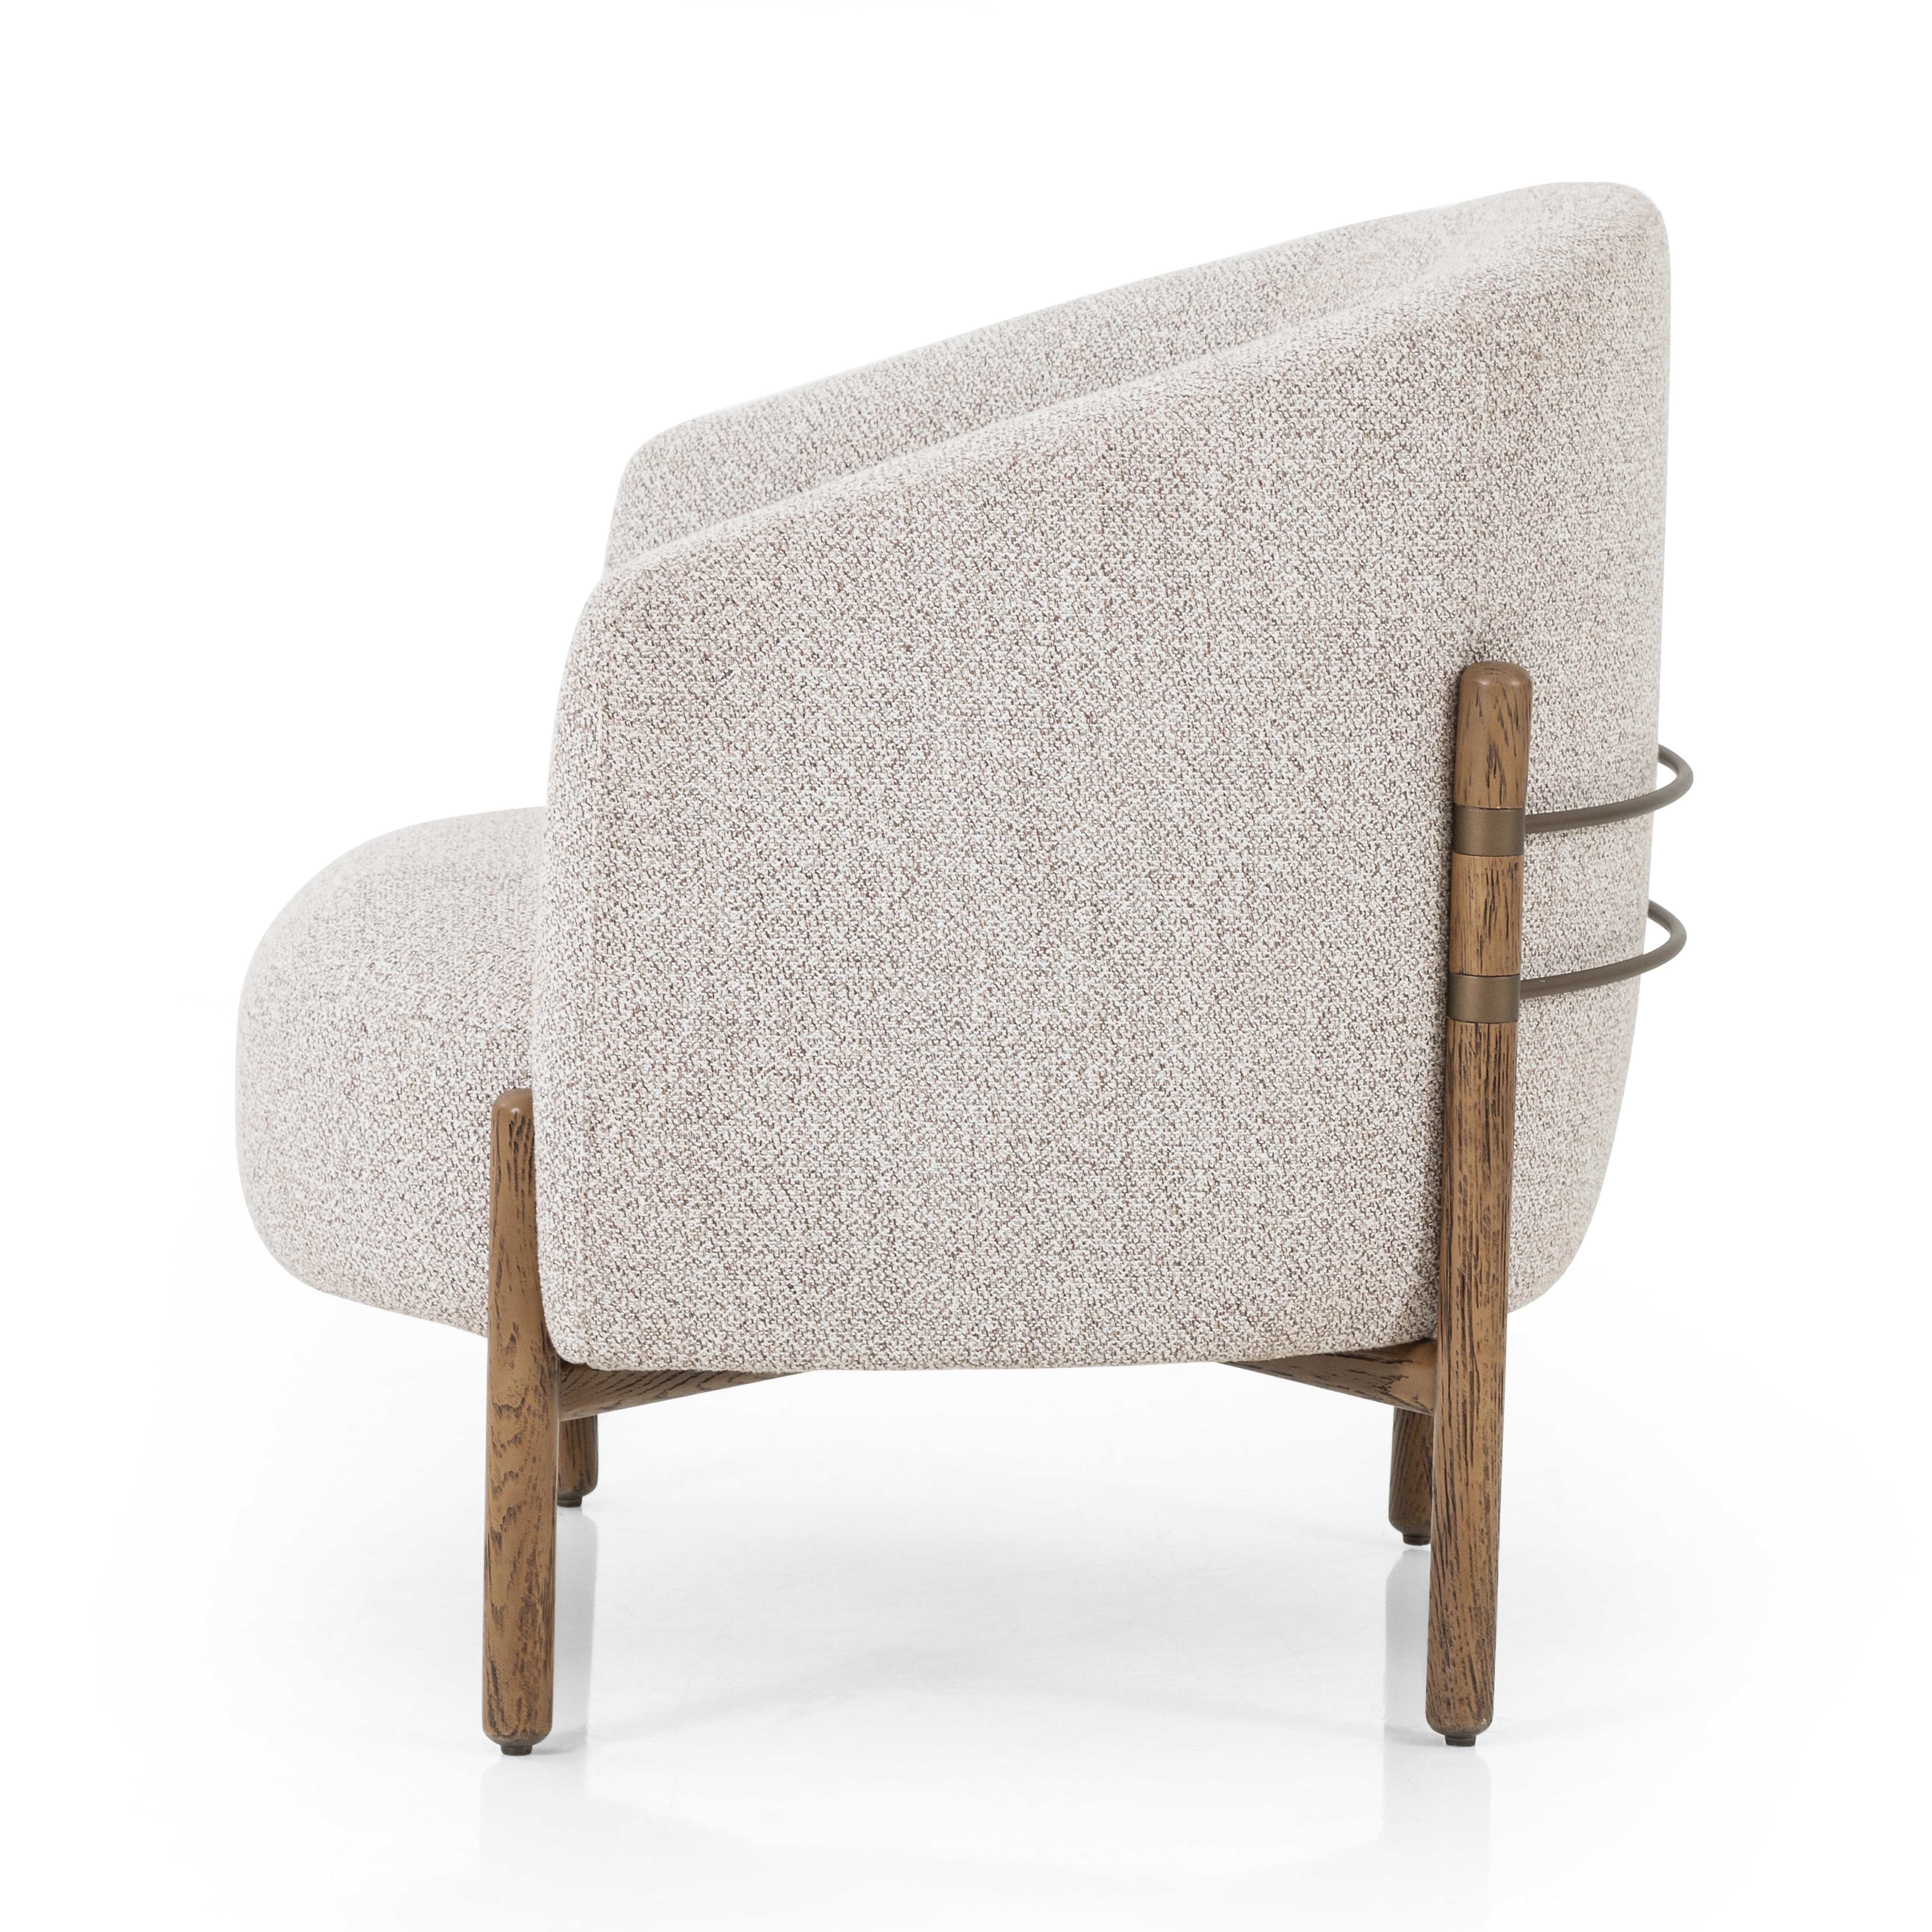 Enfield Chair-Astor Stone - Image 5